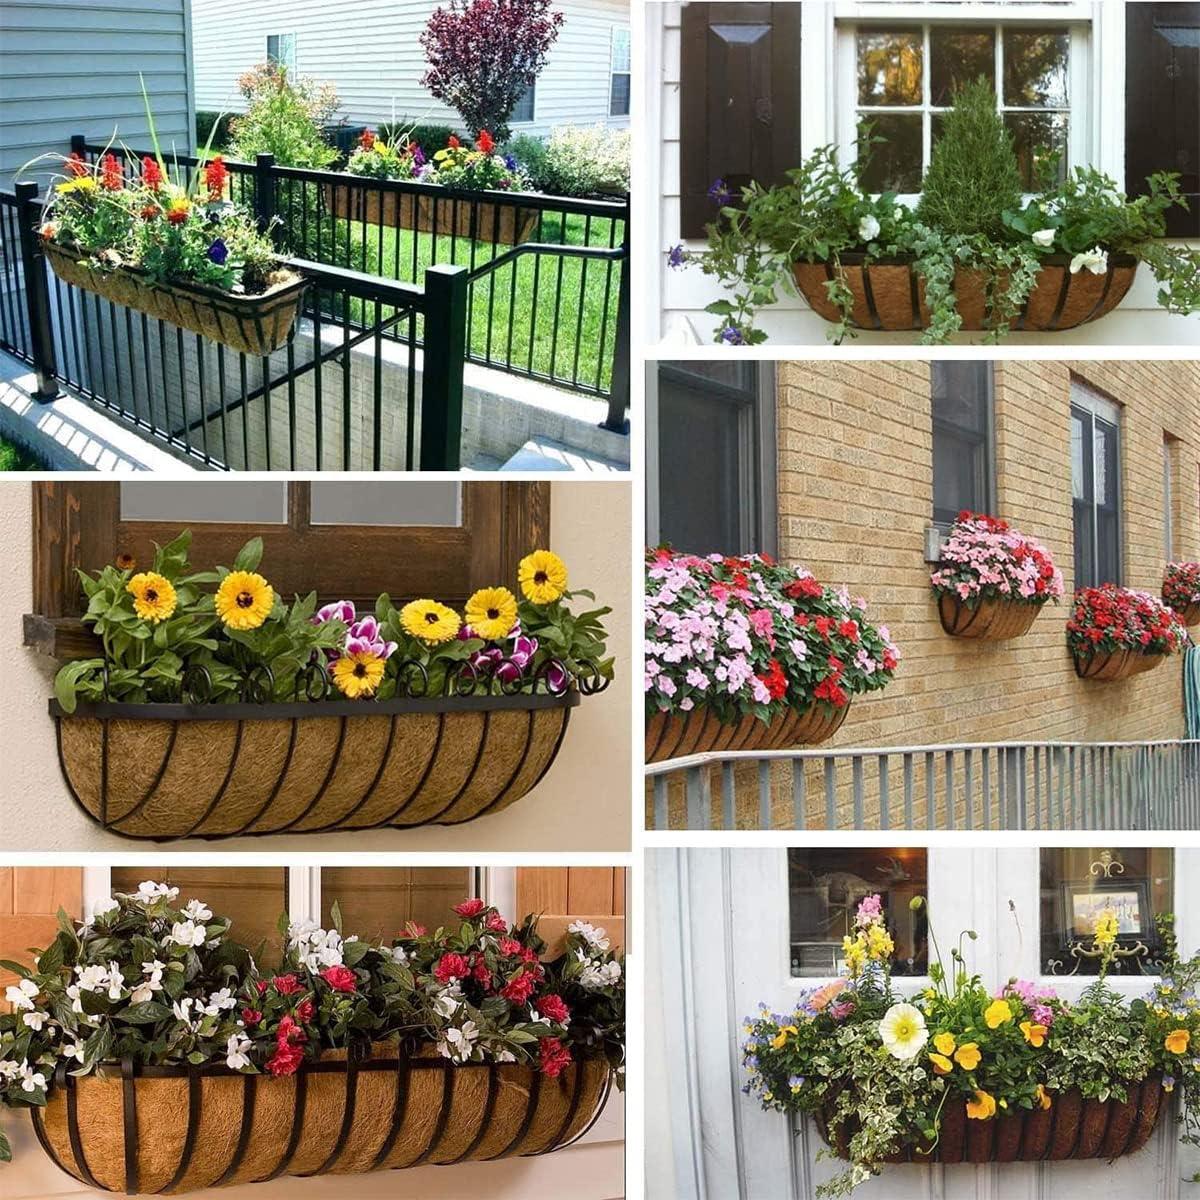 2 pcs Pre-formed Molded Coco Liners 30 inch (76cm) Window Flower Baskets - Massive Discounts